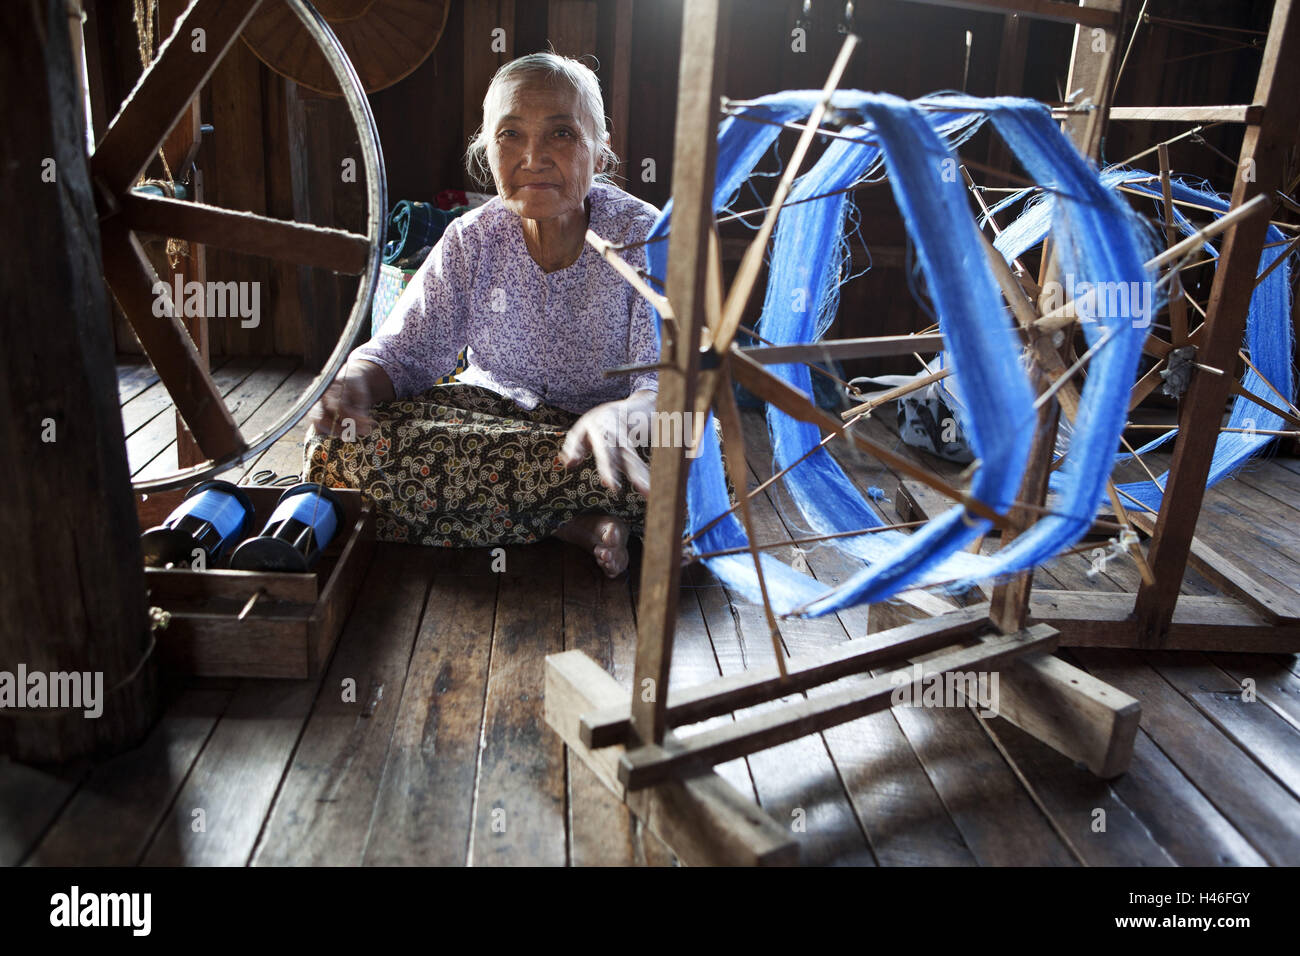 The mysterious old lady is rolling a traditional spinning wheel in